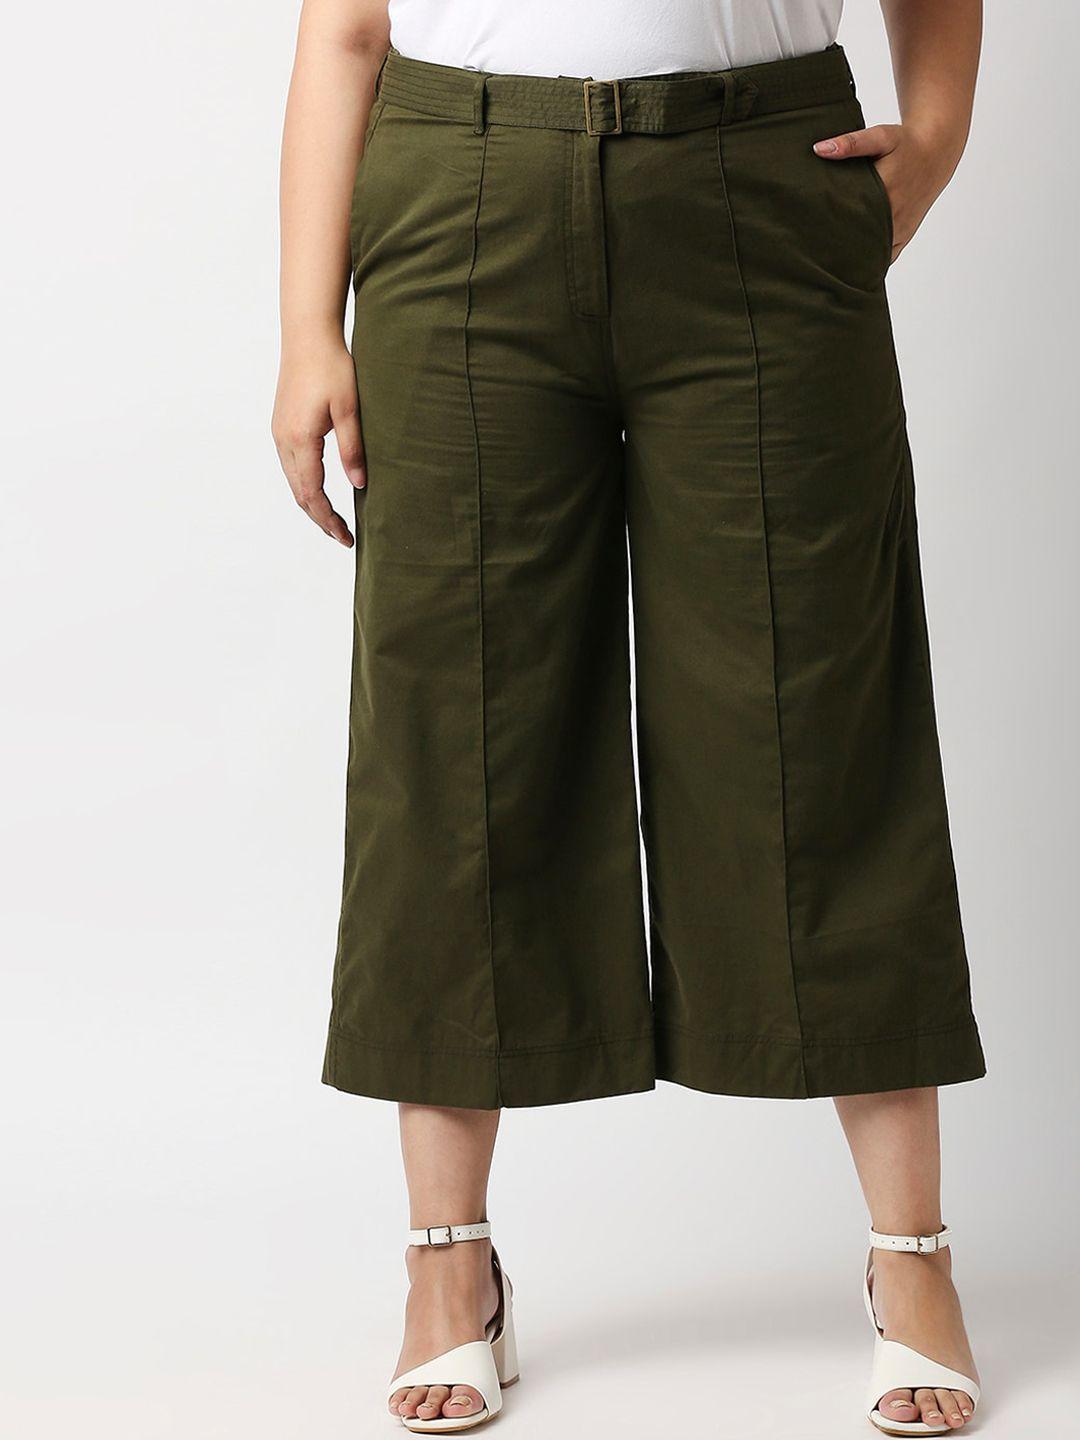 20dresses plus size women green relaxed straight fit laffer twill culottes trousers